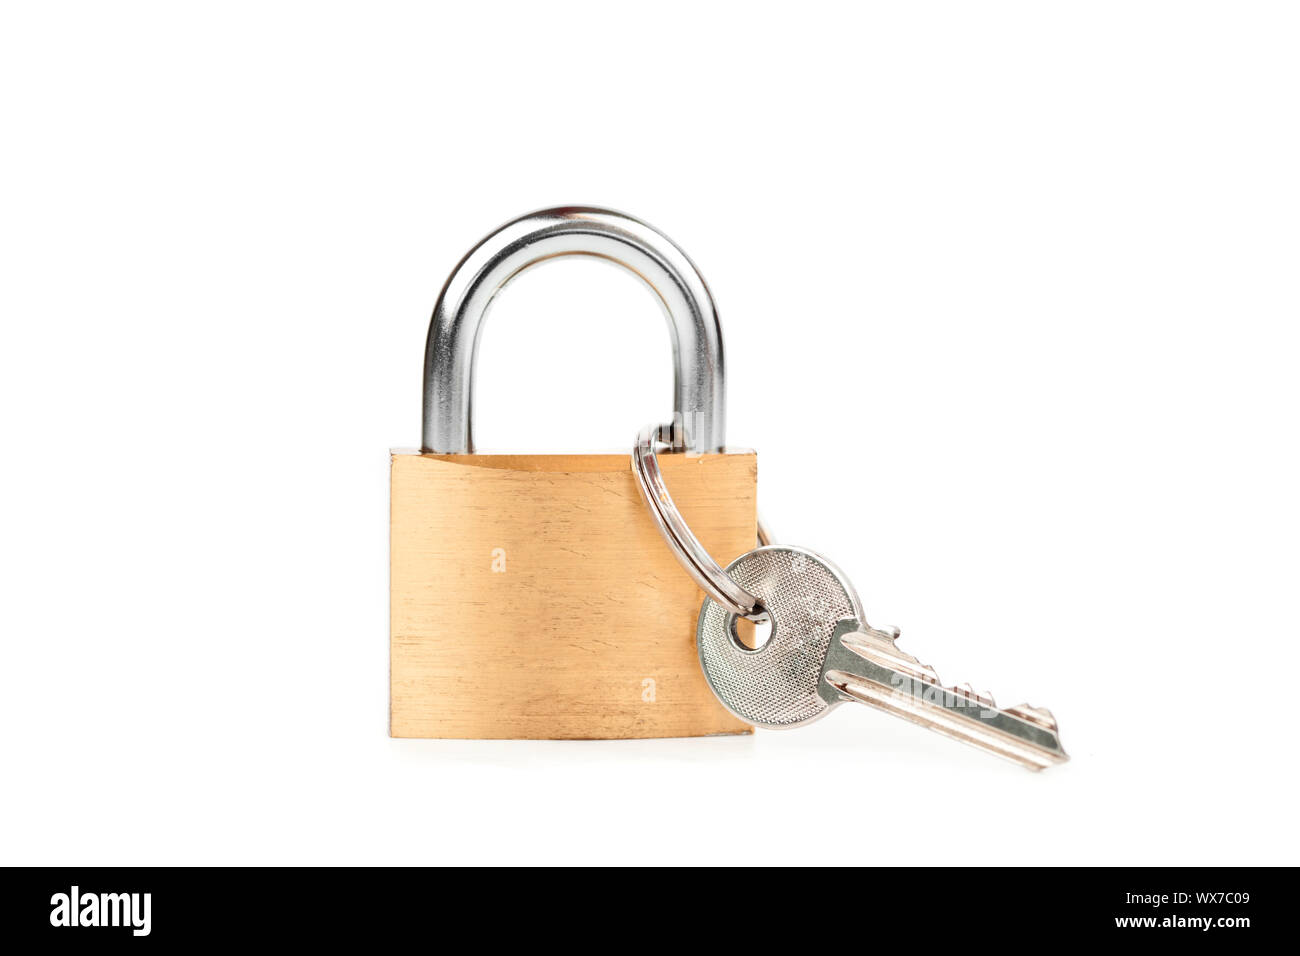 Padlock standing with  key hanging against white background Stock Photo